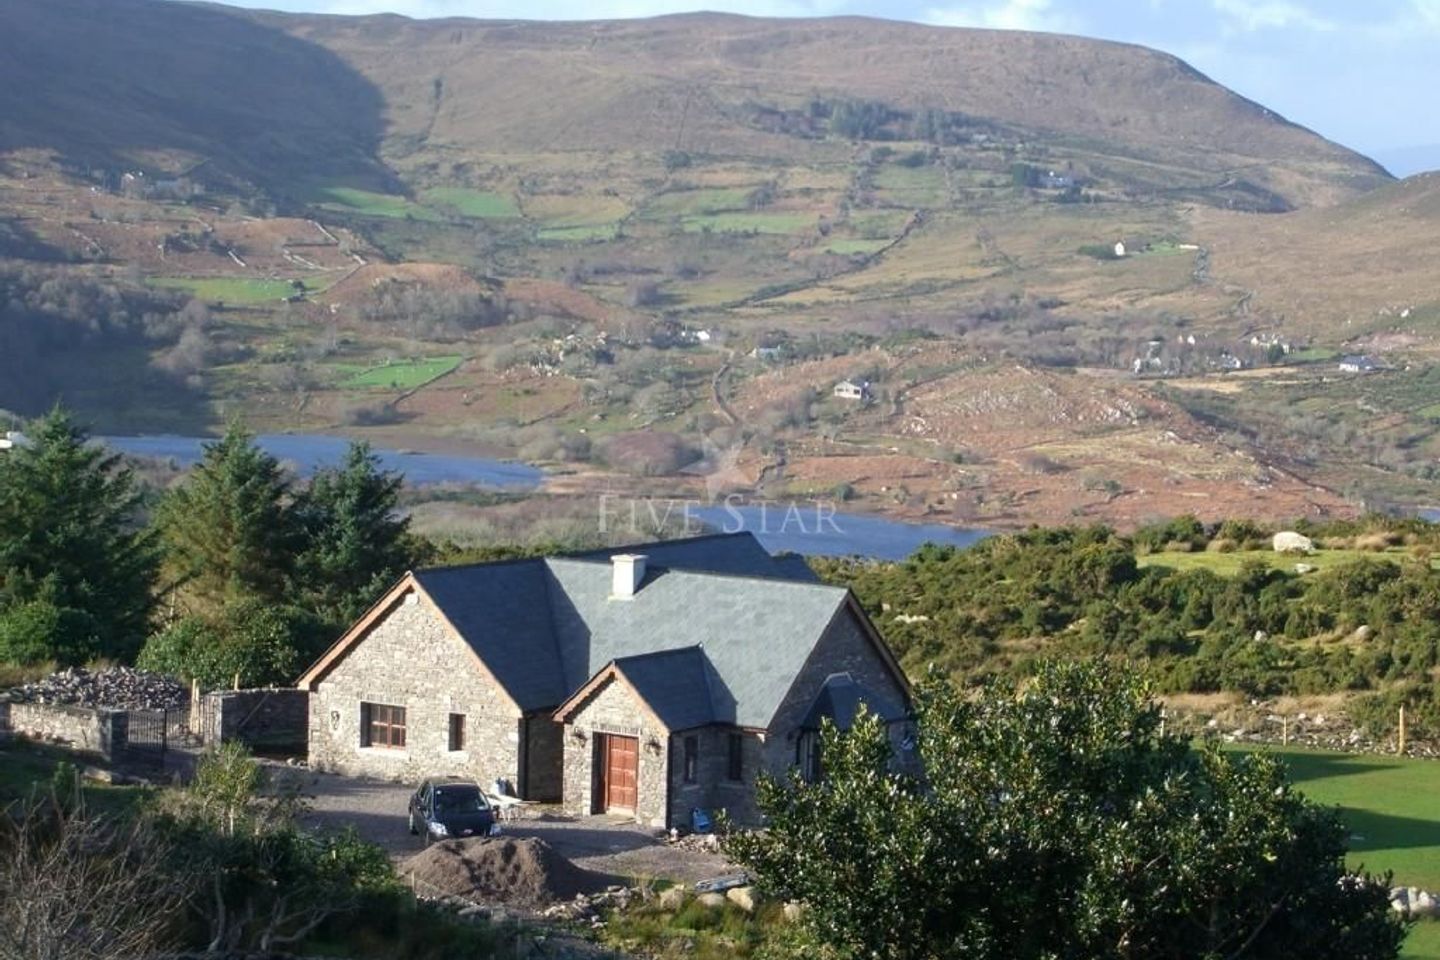 Romantic Stone Cottage, Caragh Lake, Co. Kerry